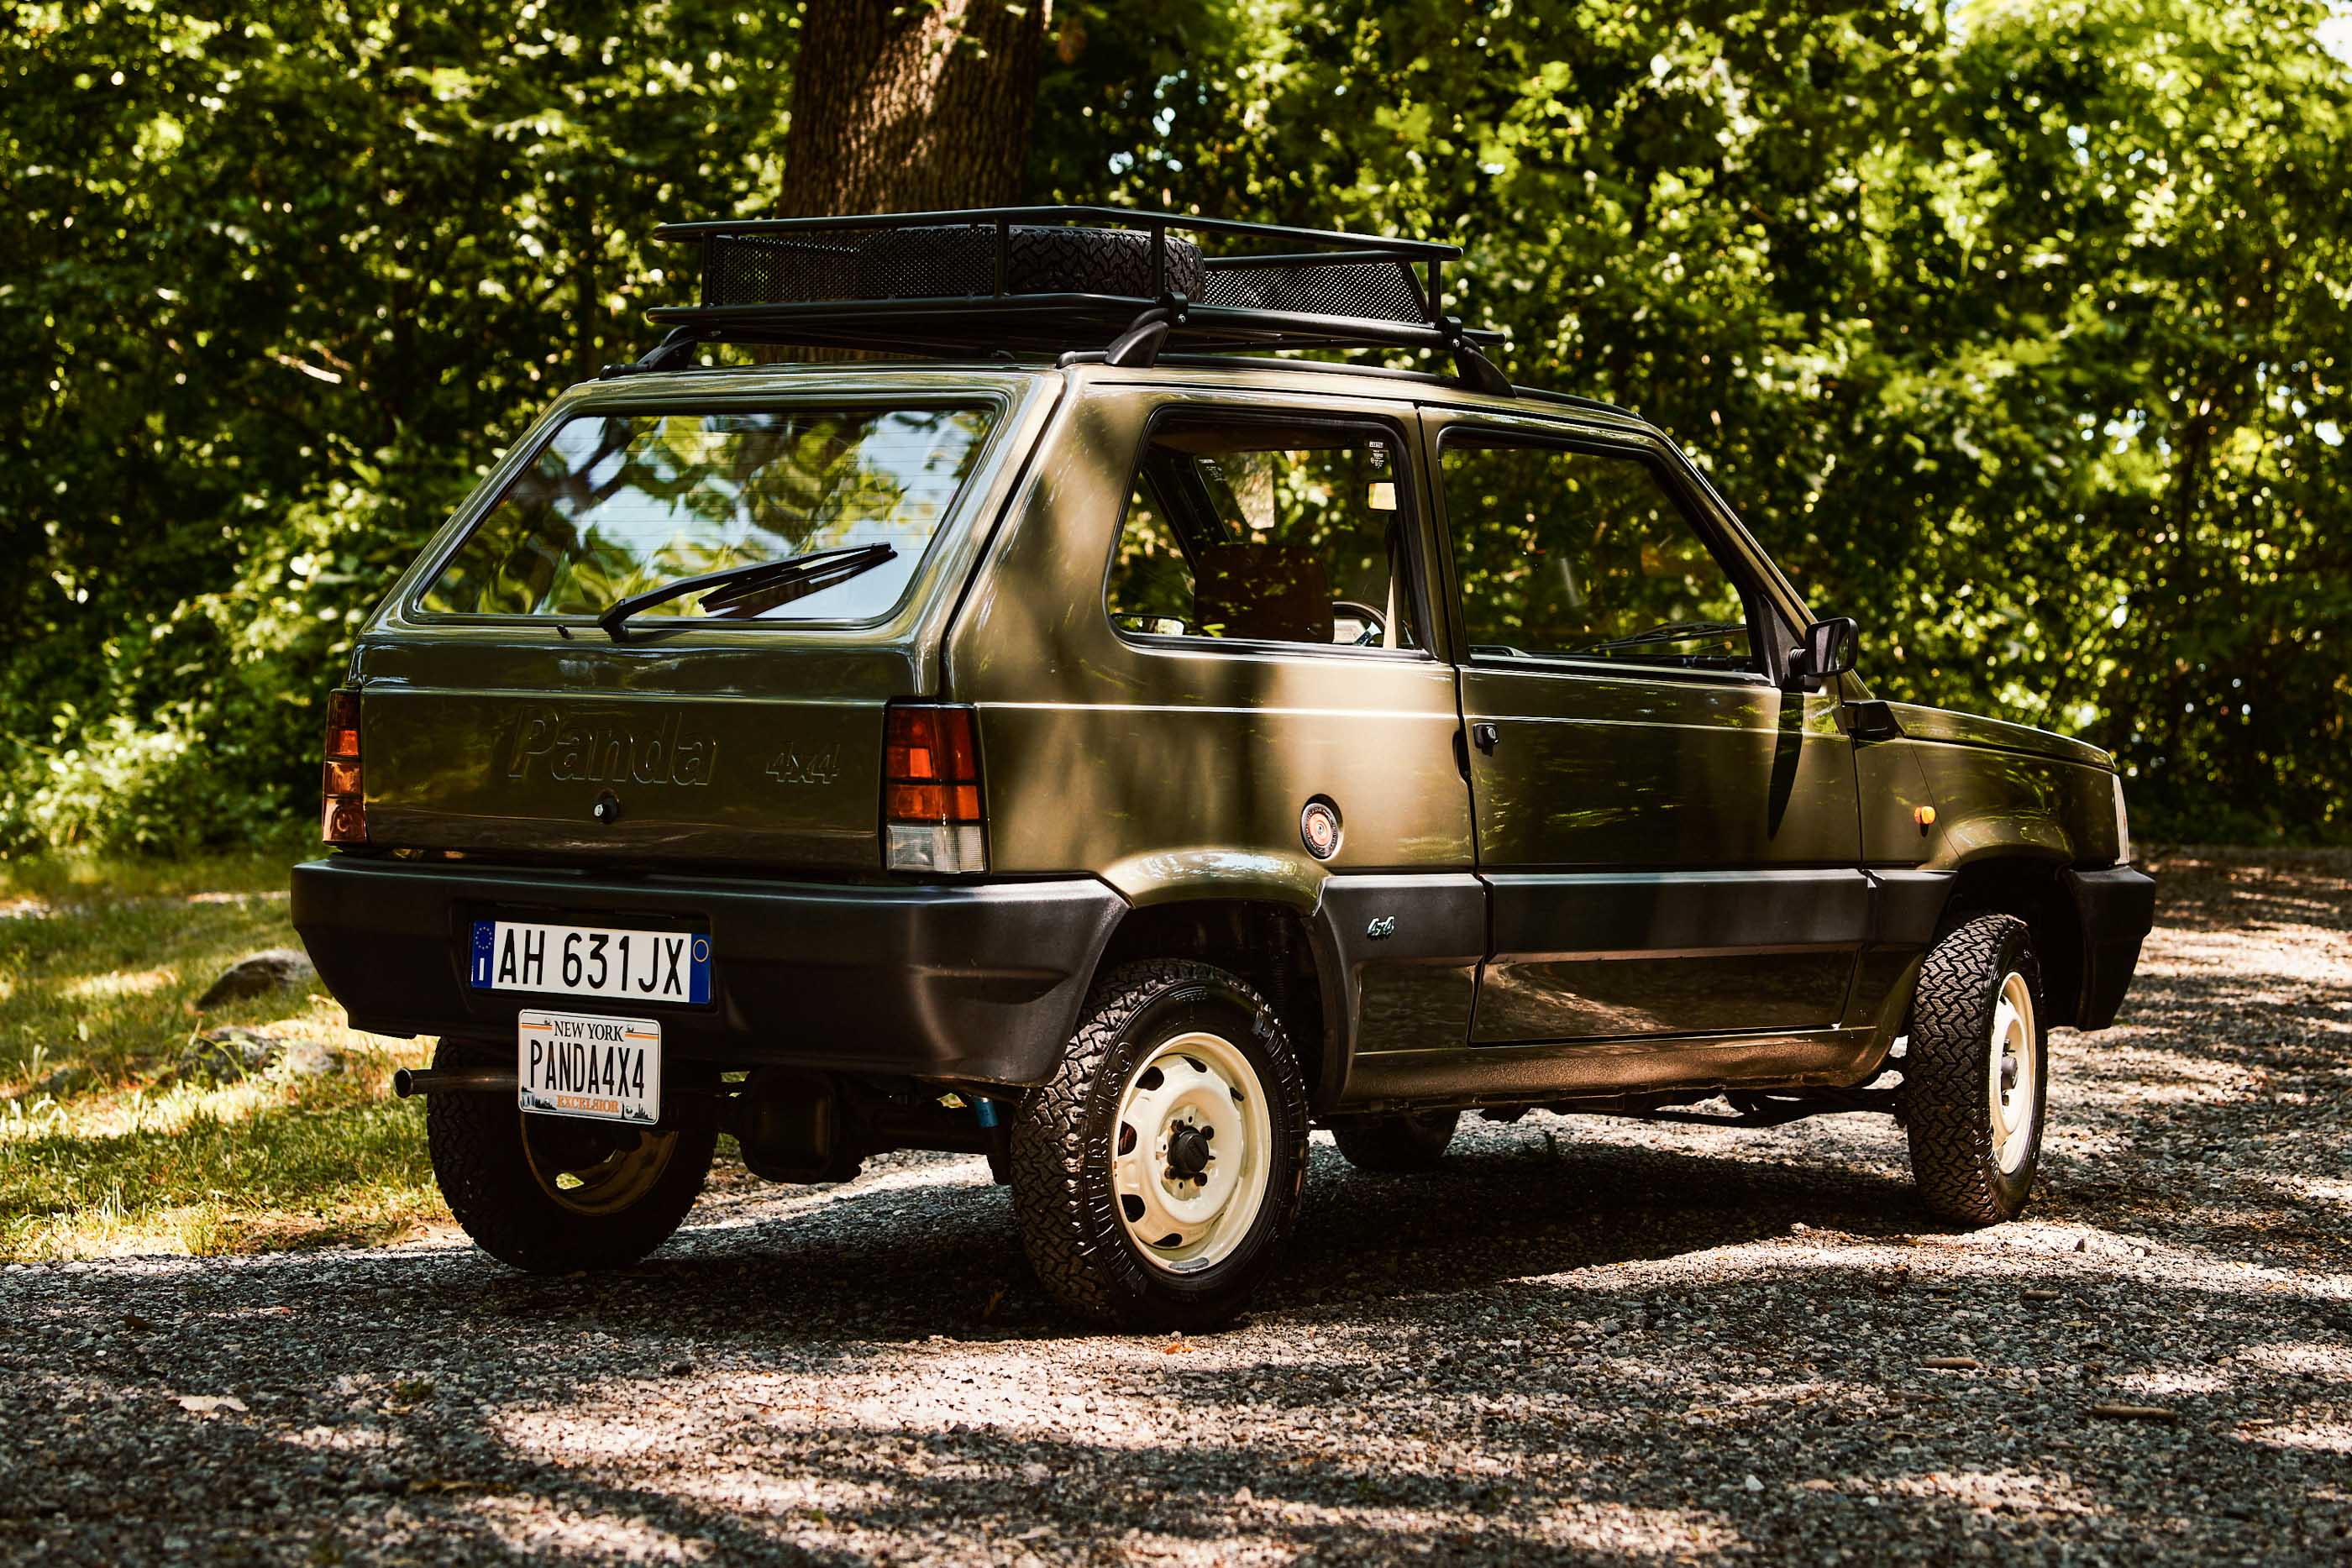 Vote: Would you buy this Fiat Panda 4x4?